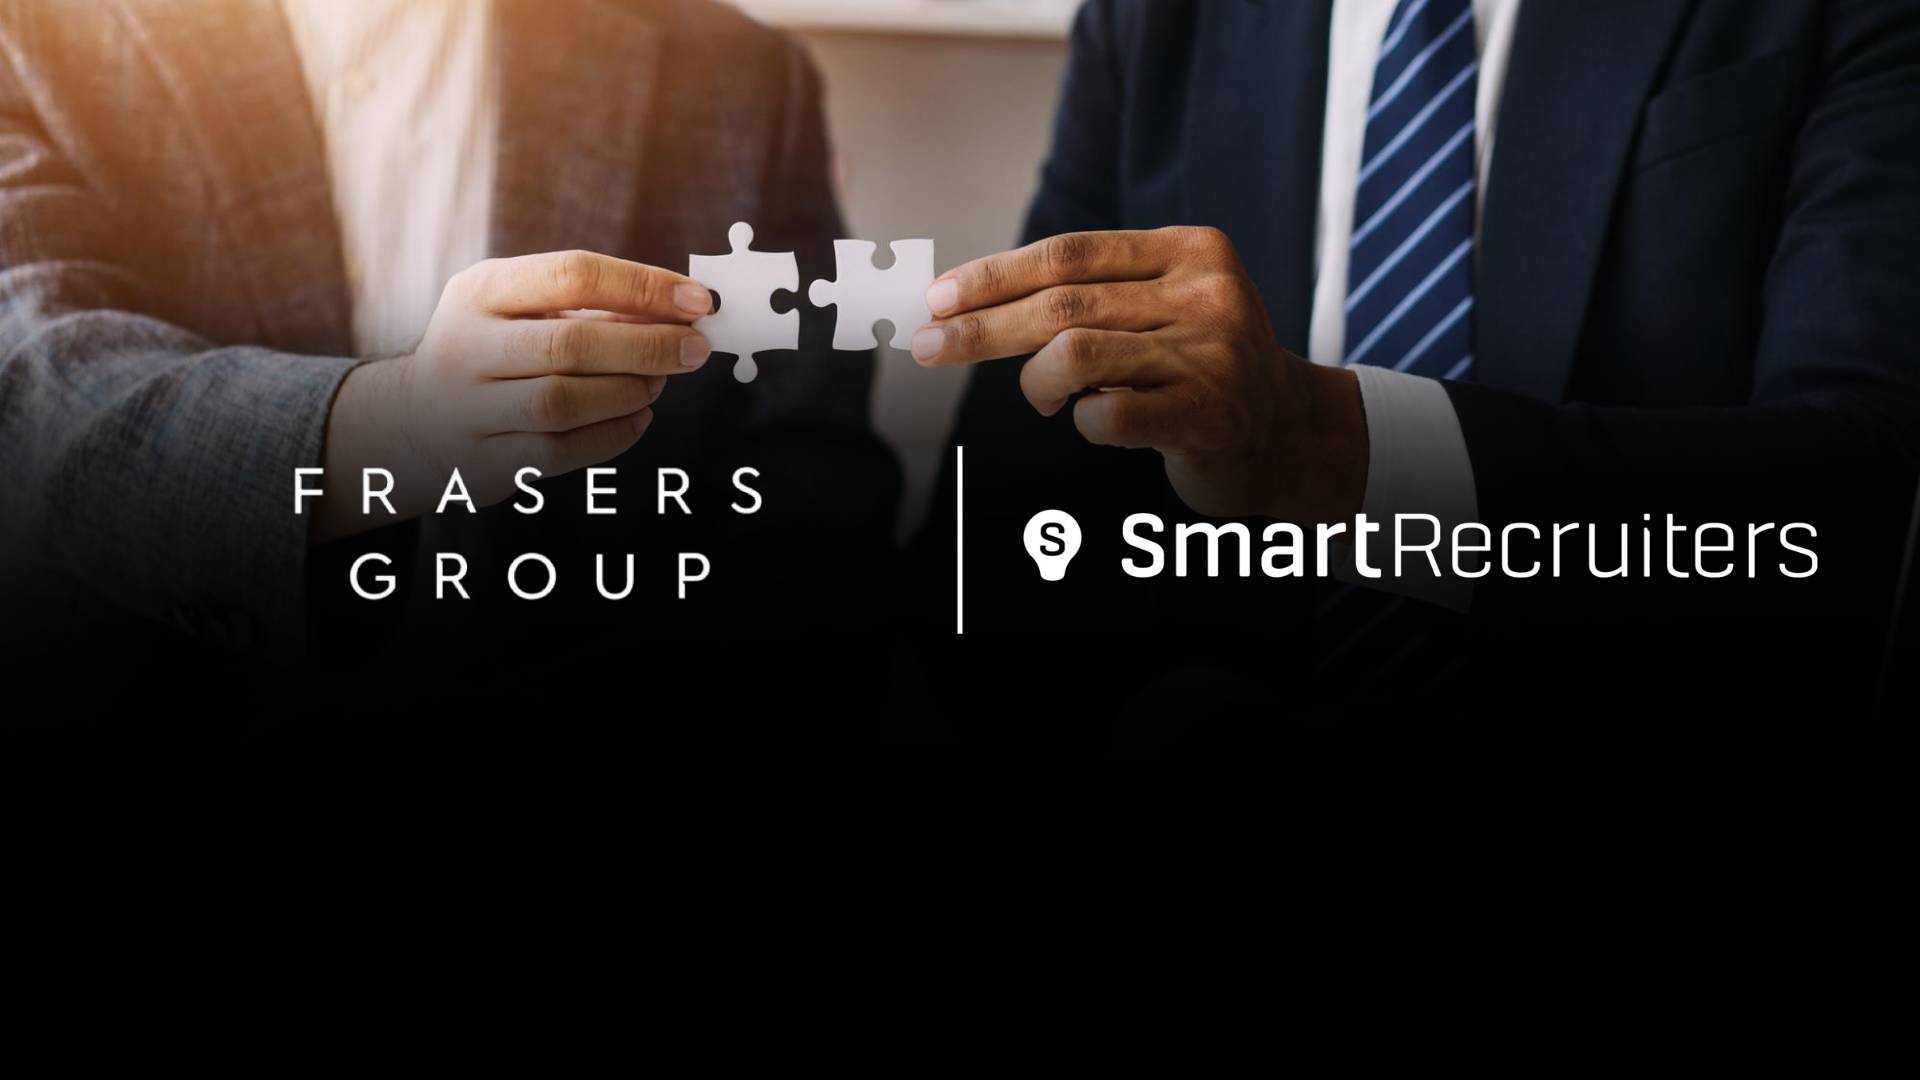 "SmartRecruiters and Frasers Group: A Partnership Revolutionizing Talent Acquisition"